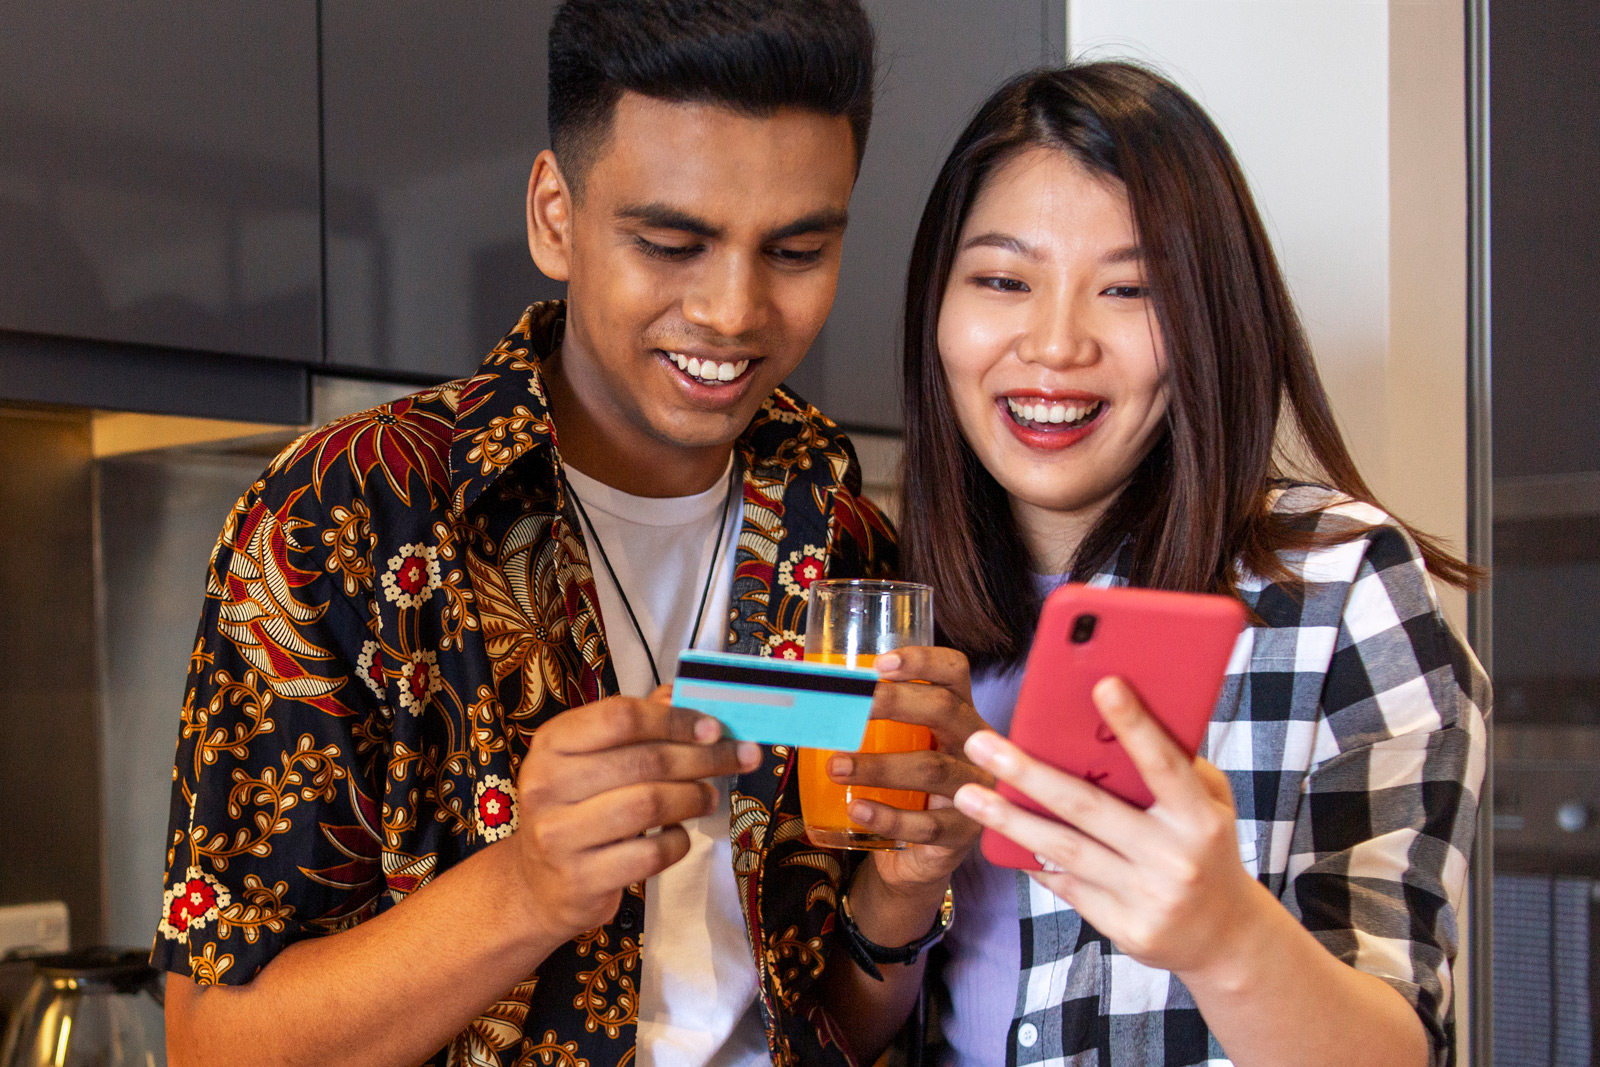 A man and a woman smile while making credit card purchases on a smartphone.